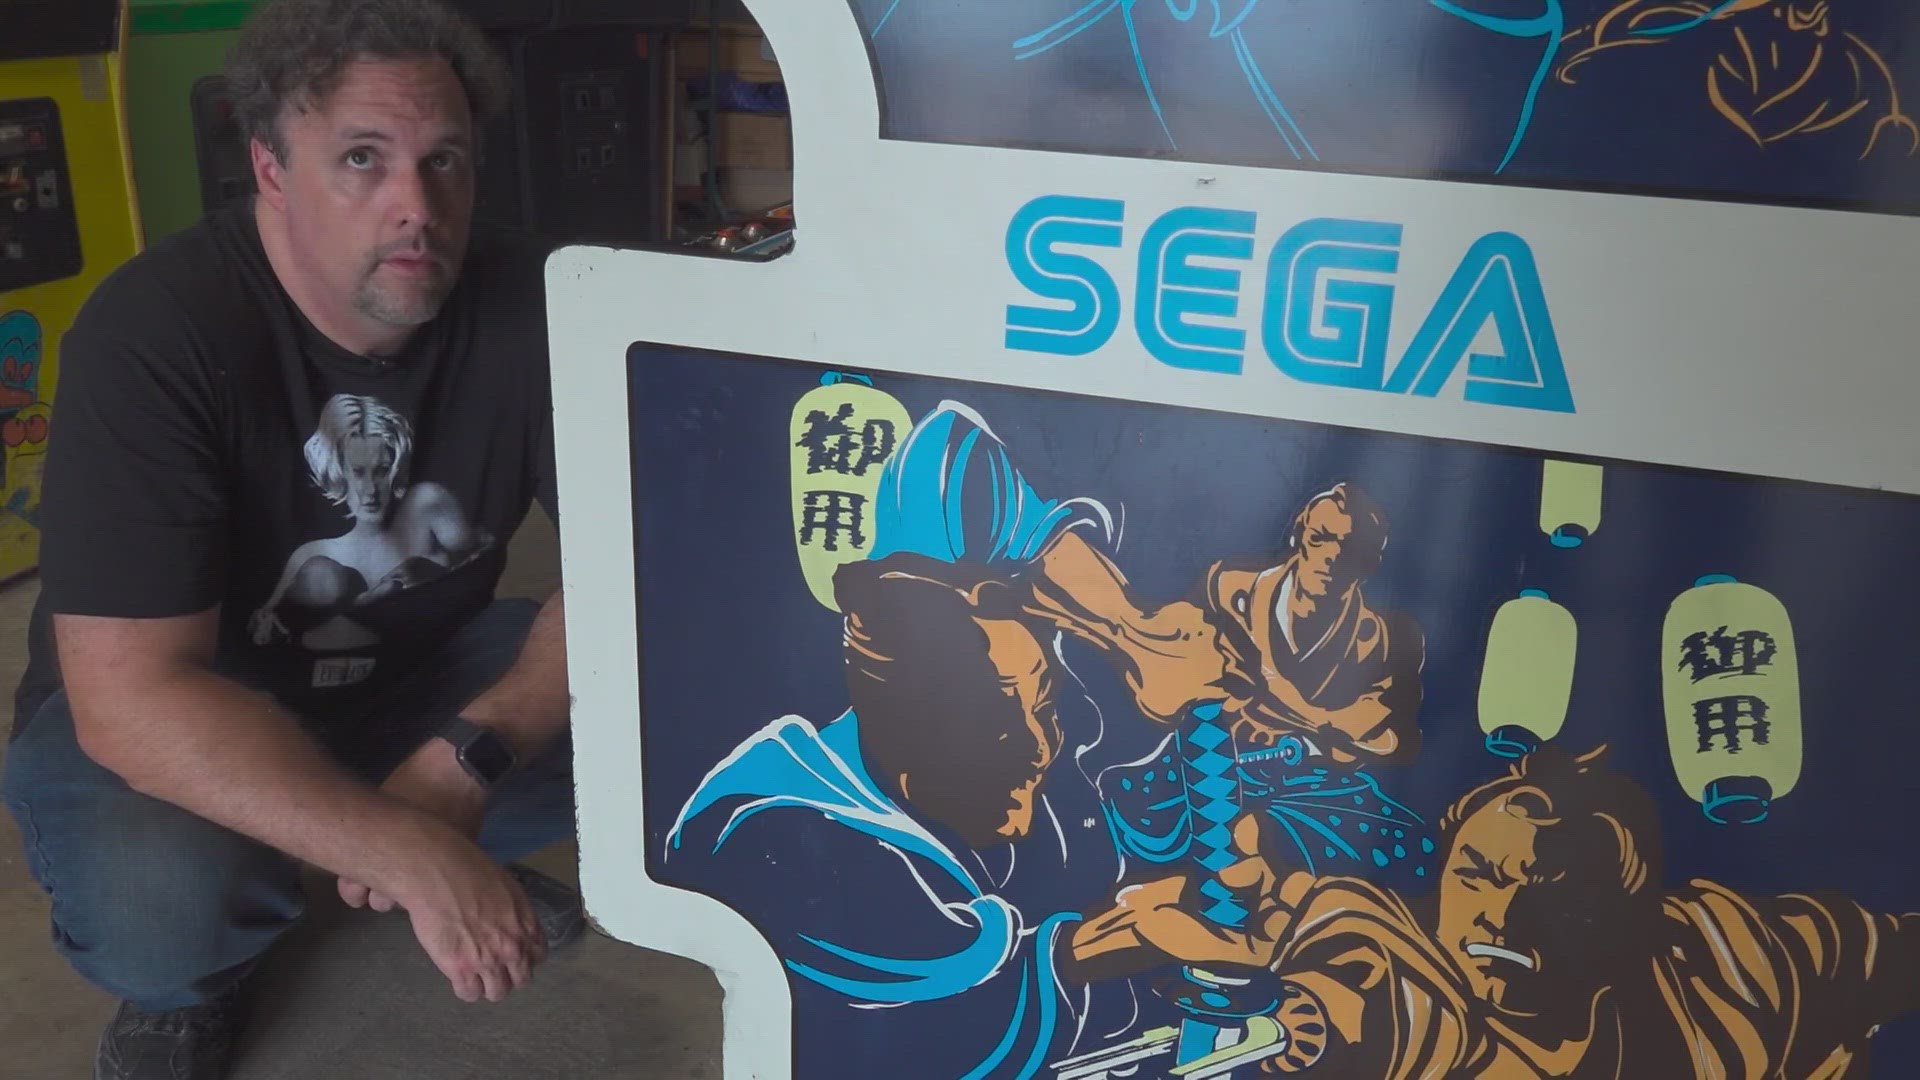 There are only two registered SEGA Samurai cabinets in existence. One is now in North Texas